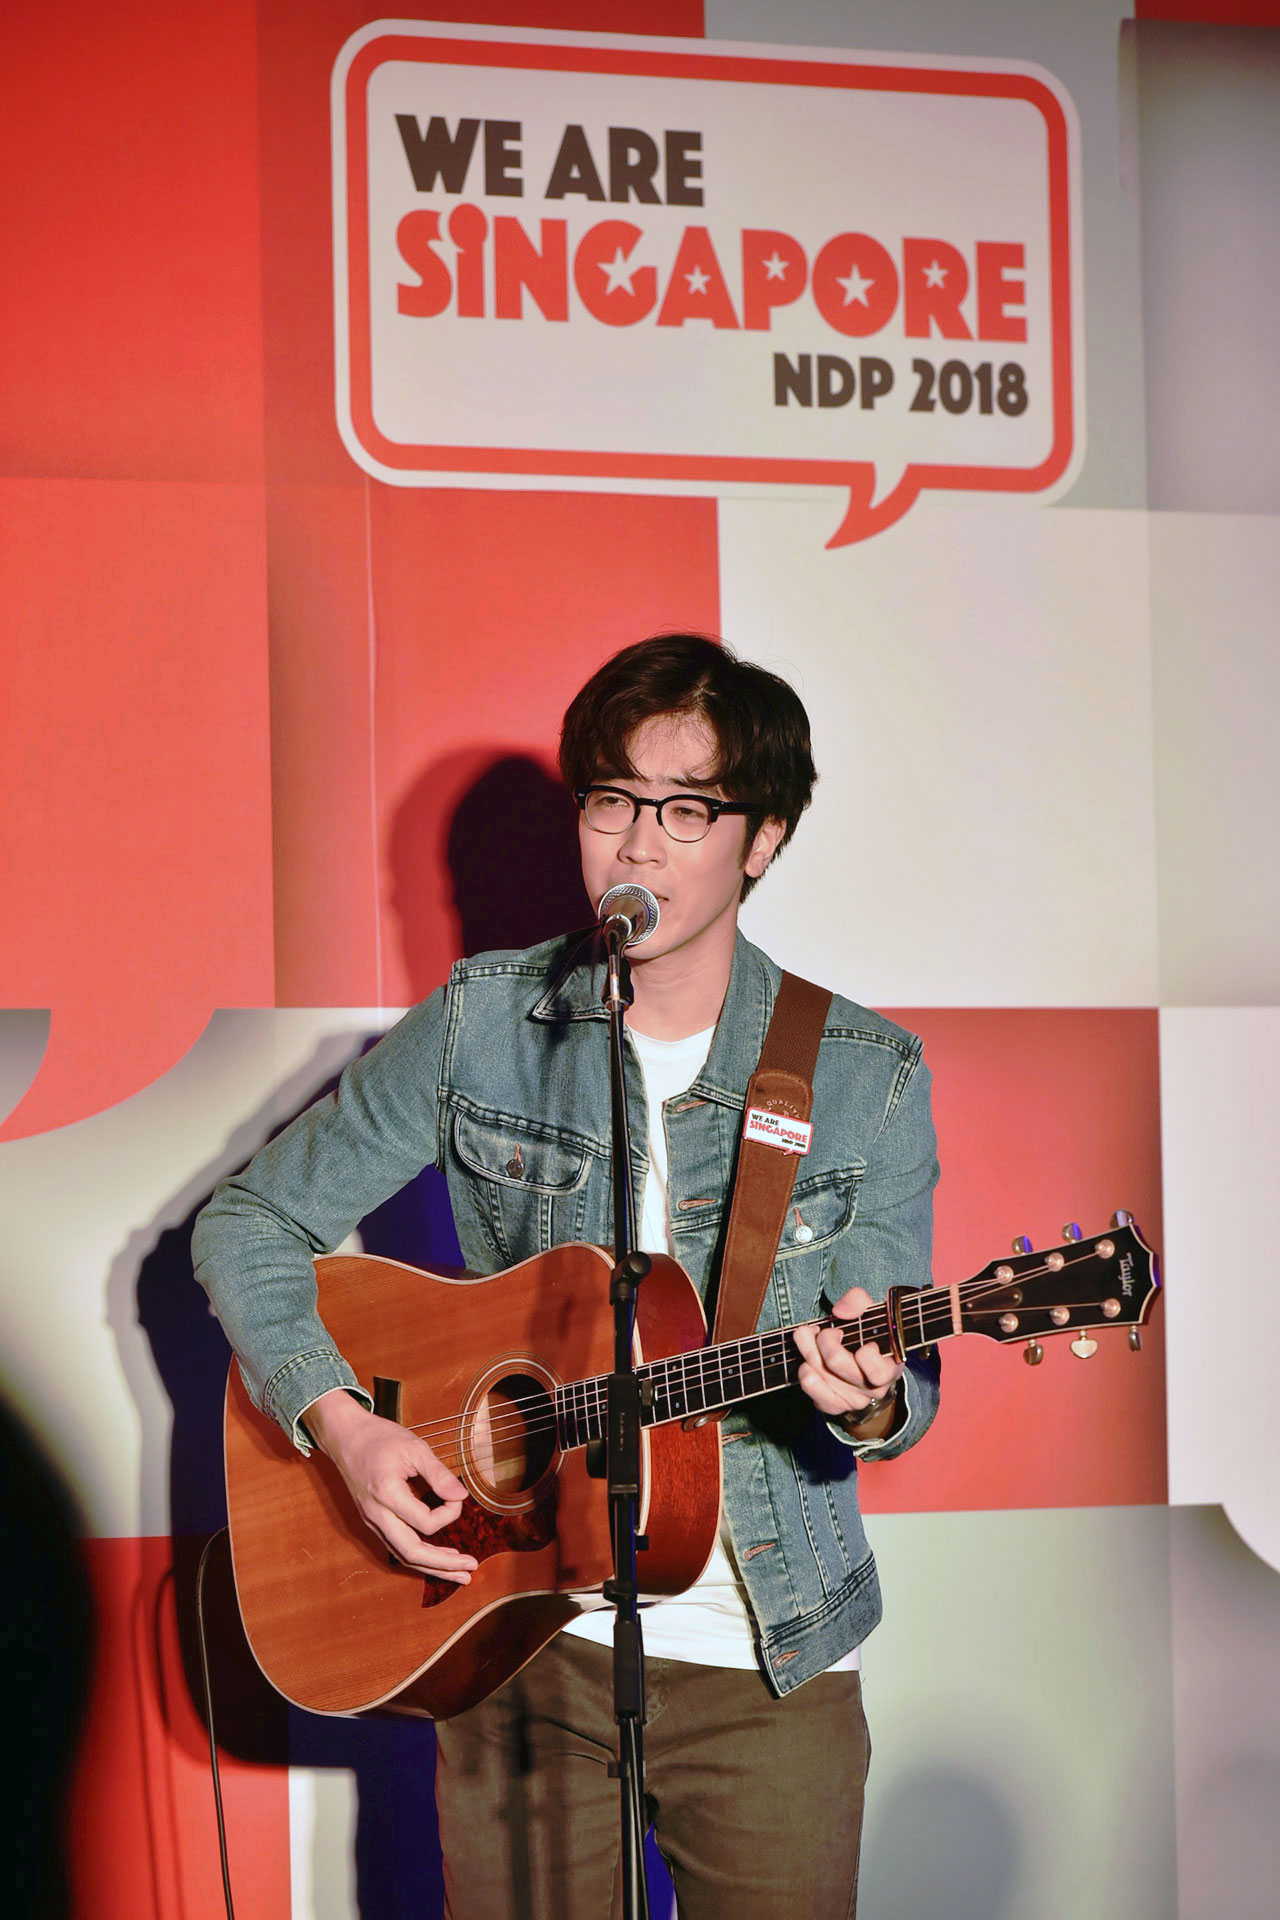 NDP 2018 theme, logo, song unveiled